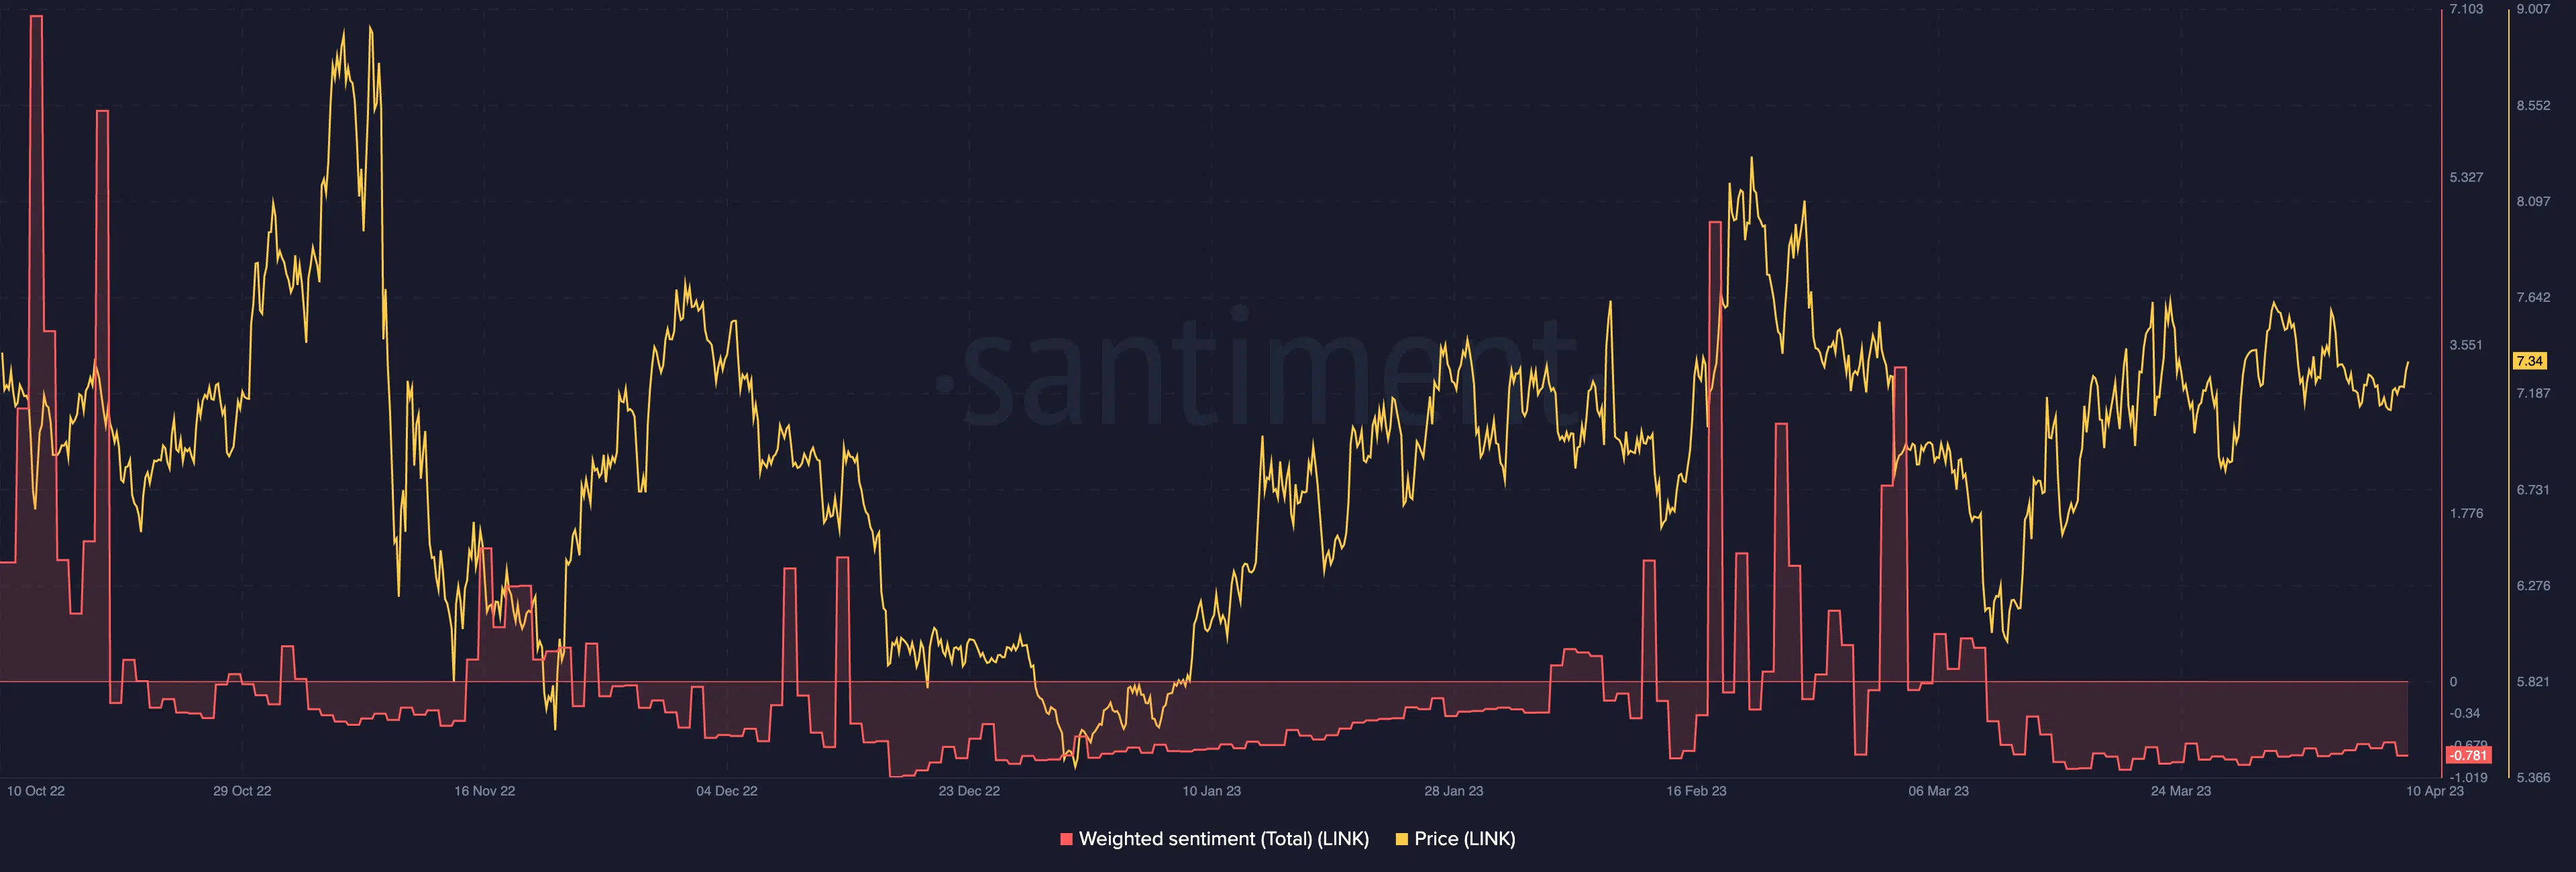 Chainlink weighted sentiment and LINK price